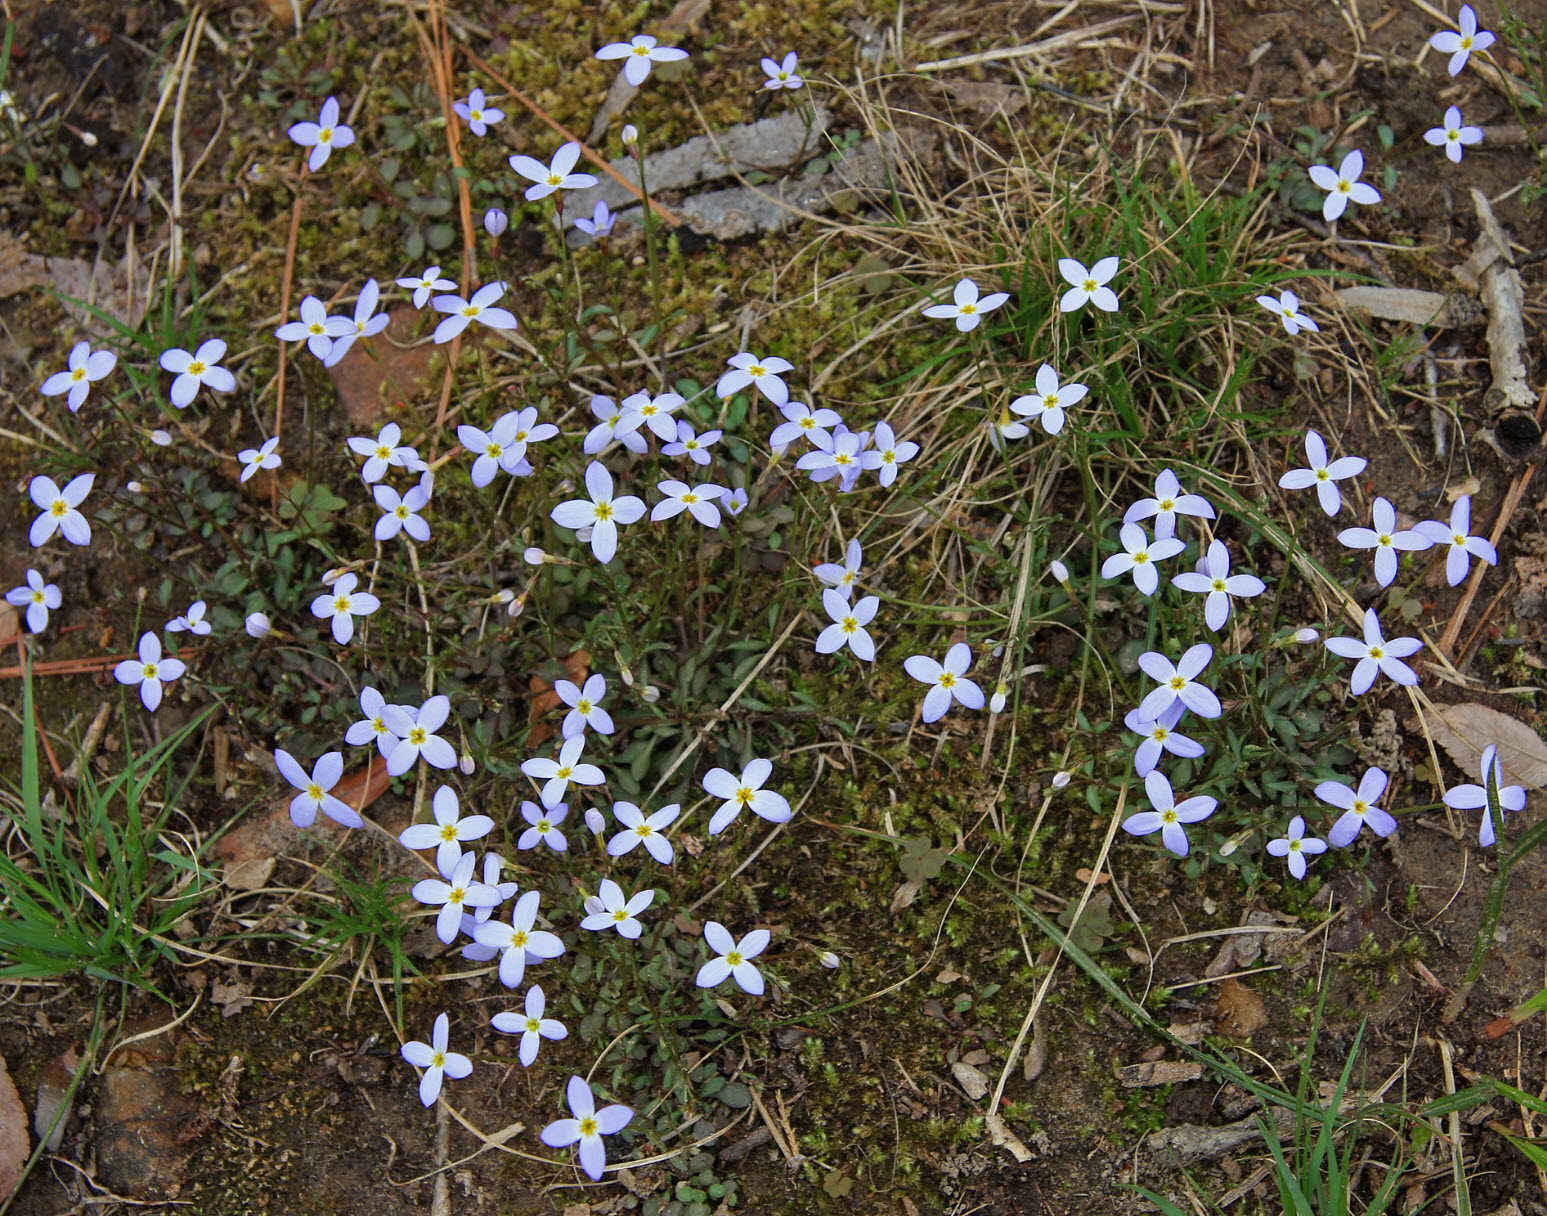 35 BLUE Wildflowers Found in the United States! (ID GUIDE) - Bird Watching  HQ